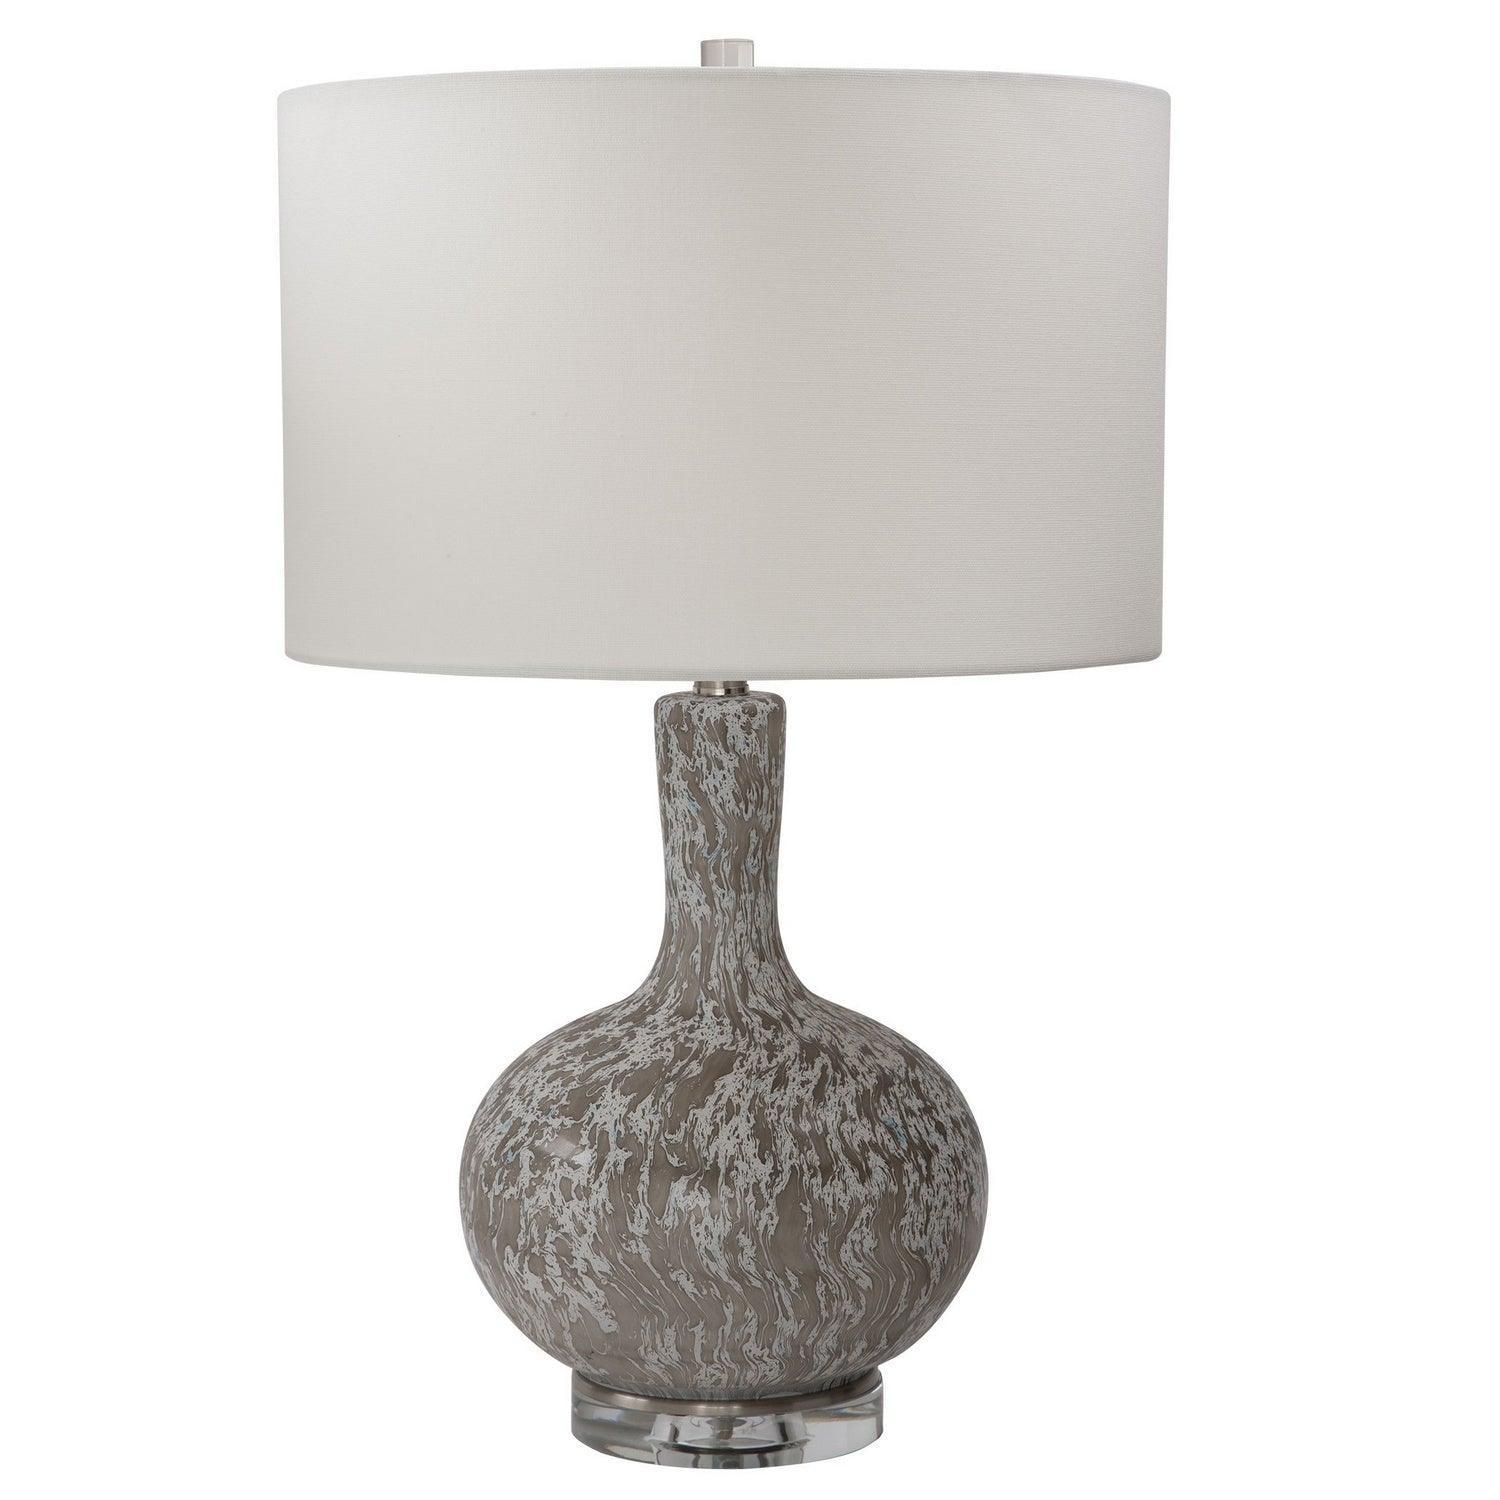 The Uttermost - Turbulence One Light Table Lamp - 28483-1 | Montreal Lighting & Hardware